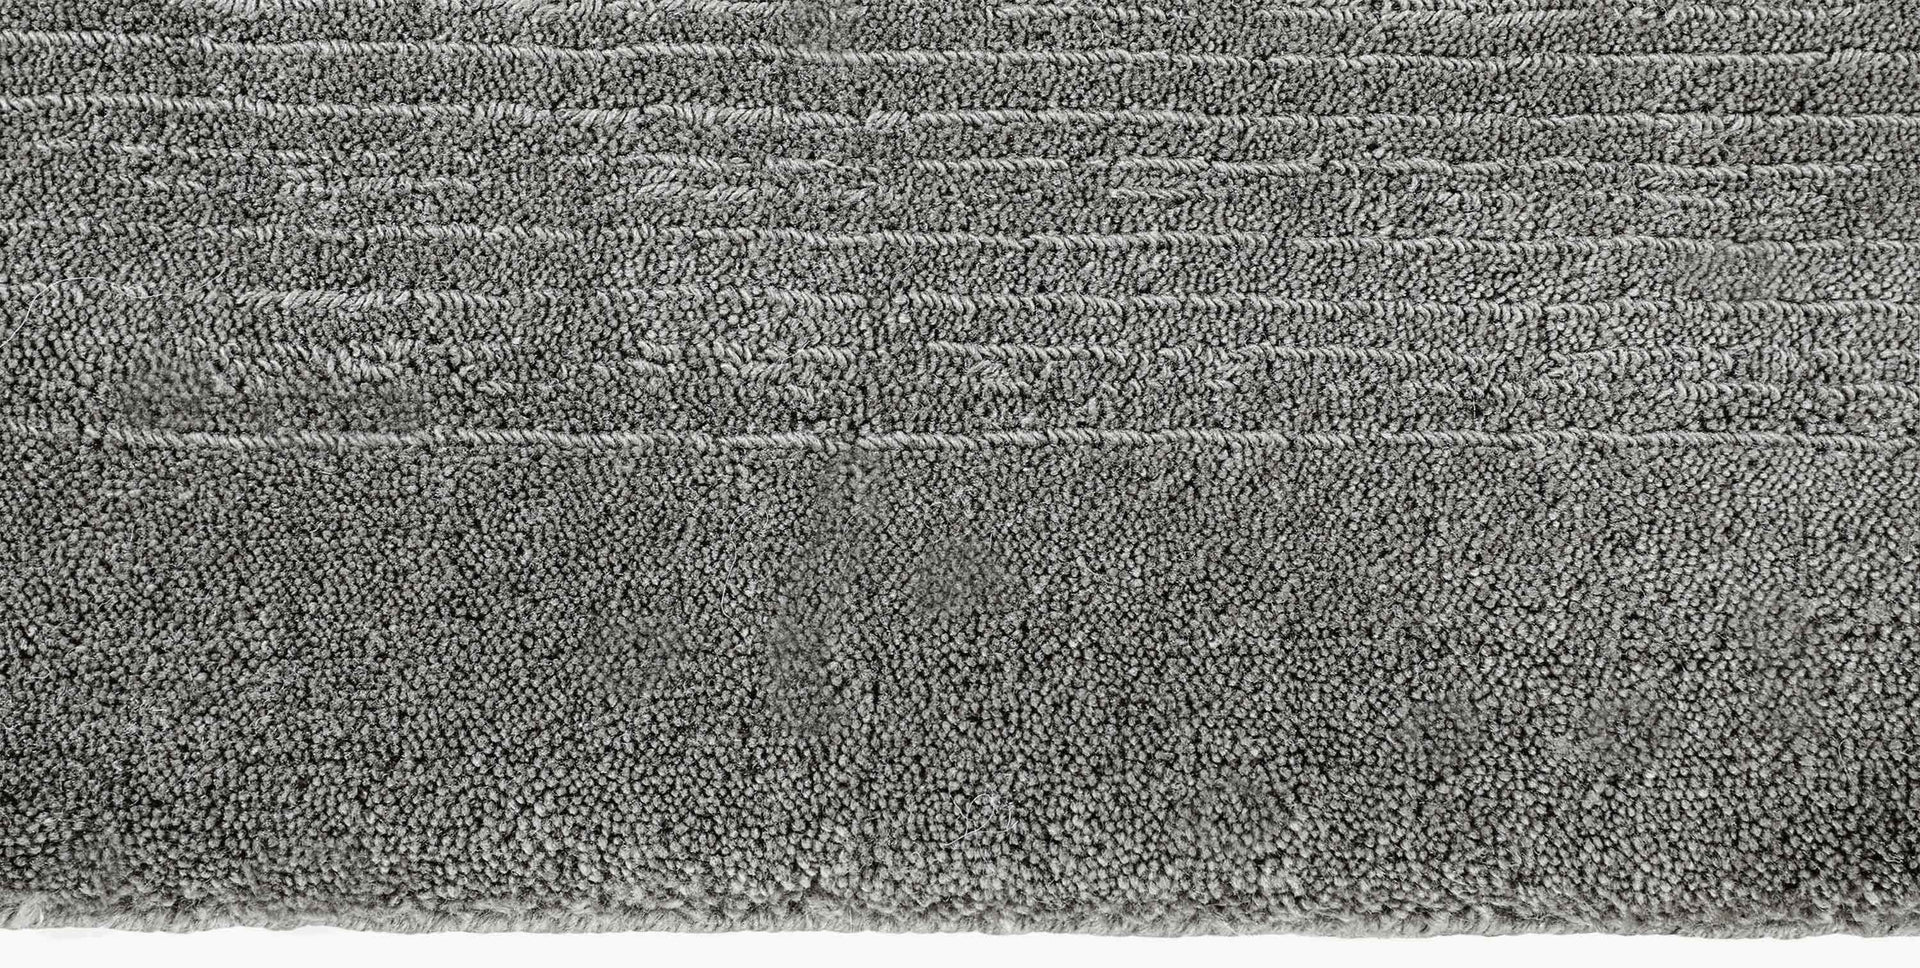 Performance Textra Rug – Charcoal